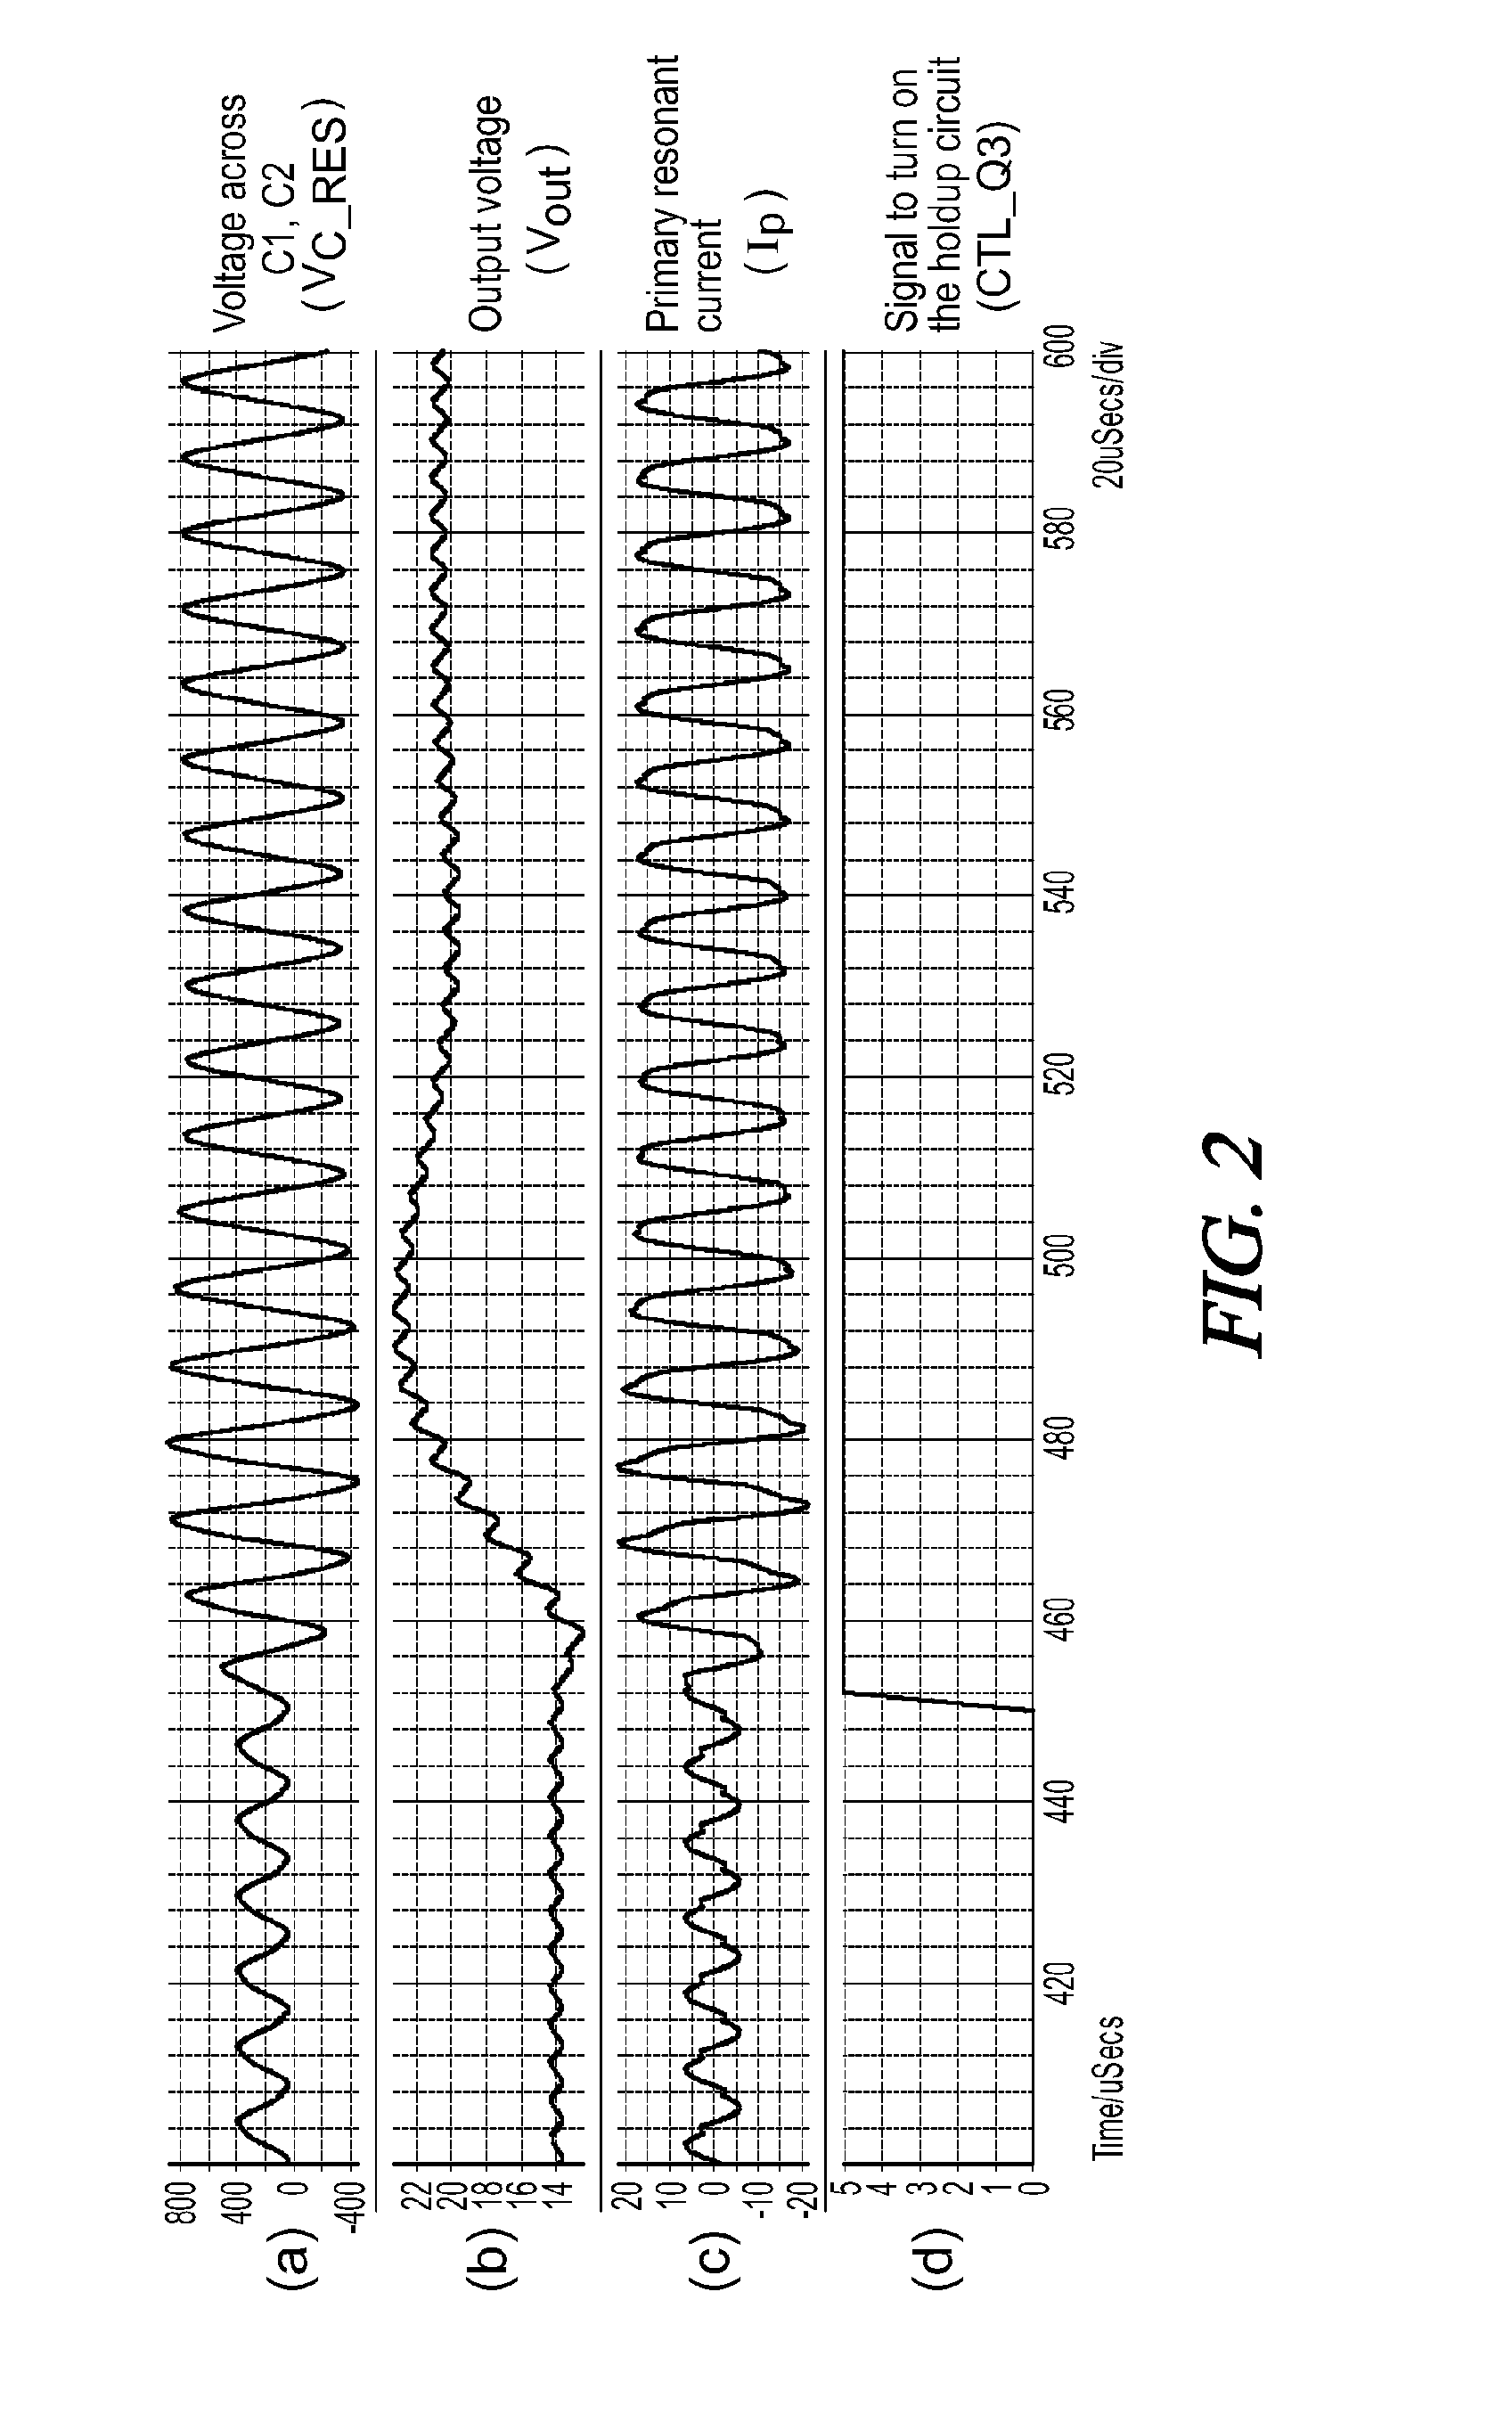 Hold-up time enhancement circuit for llc resonant converter